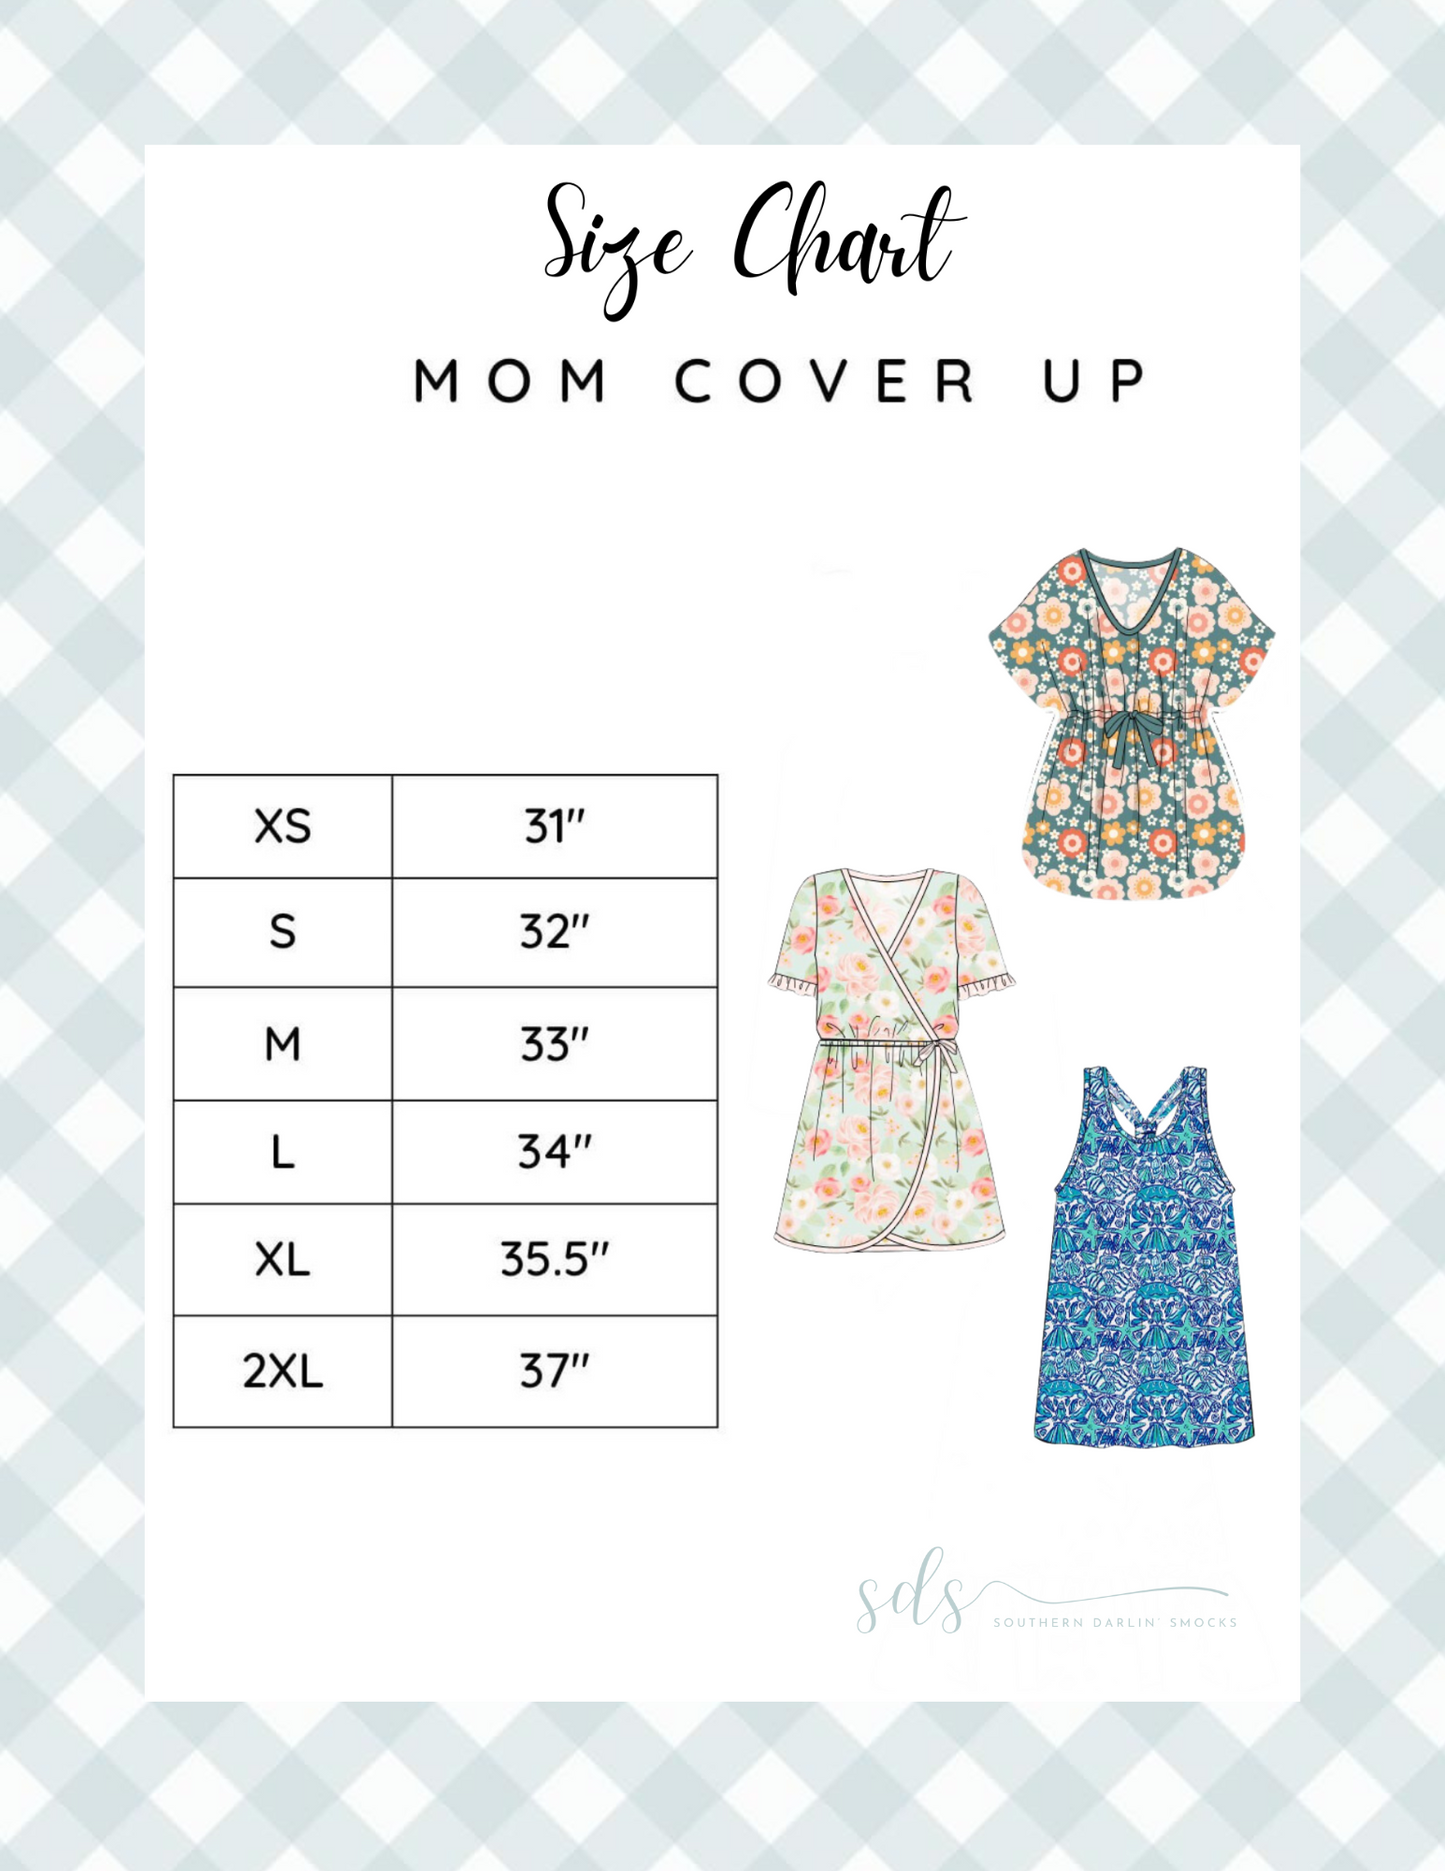 MOM COVERUP SIZE CHART